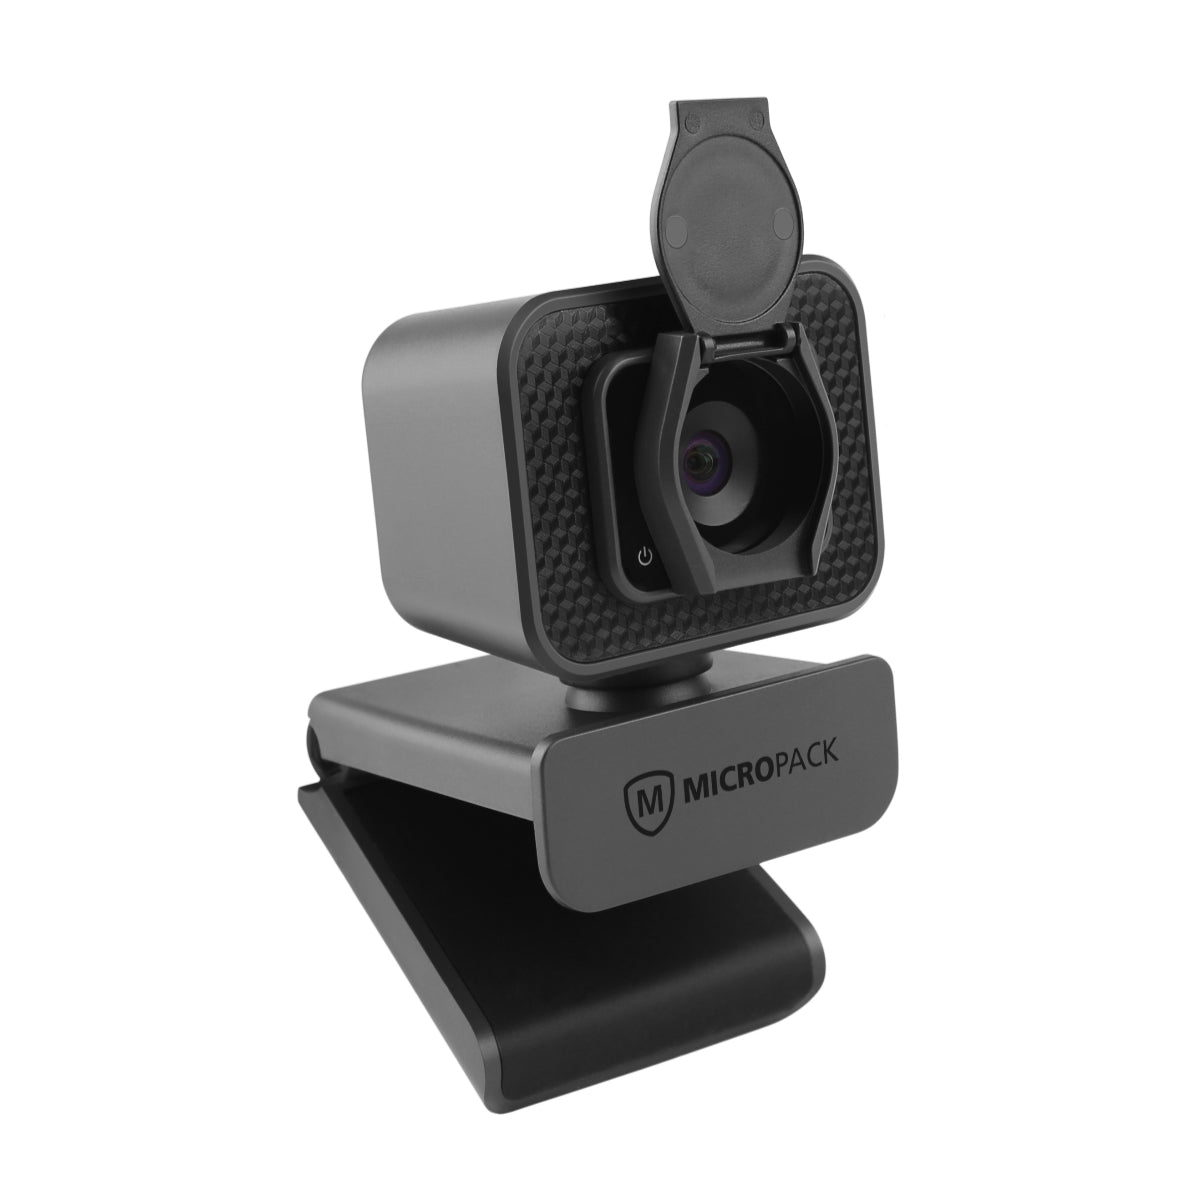 Wholesale Webcams Supply 1080P Web Camera for PC Laptop MWB-15